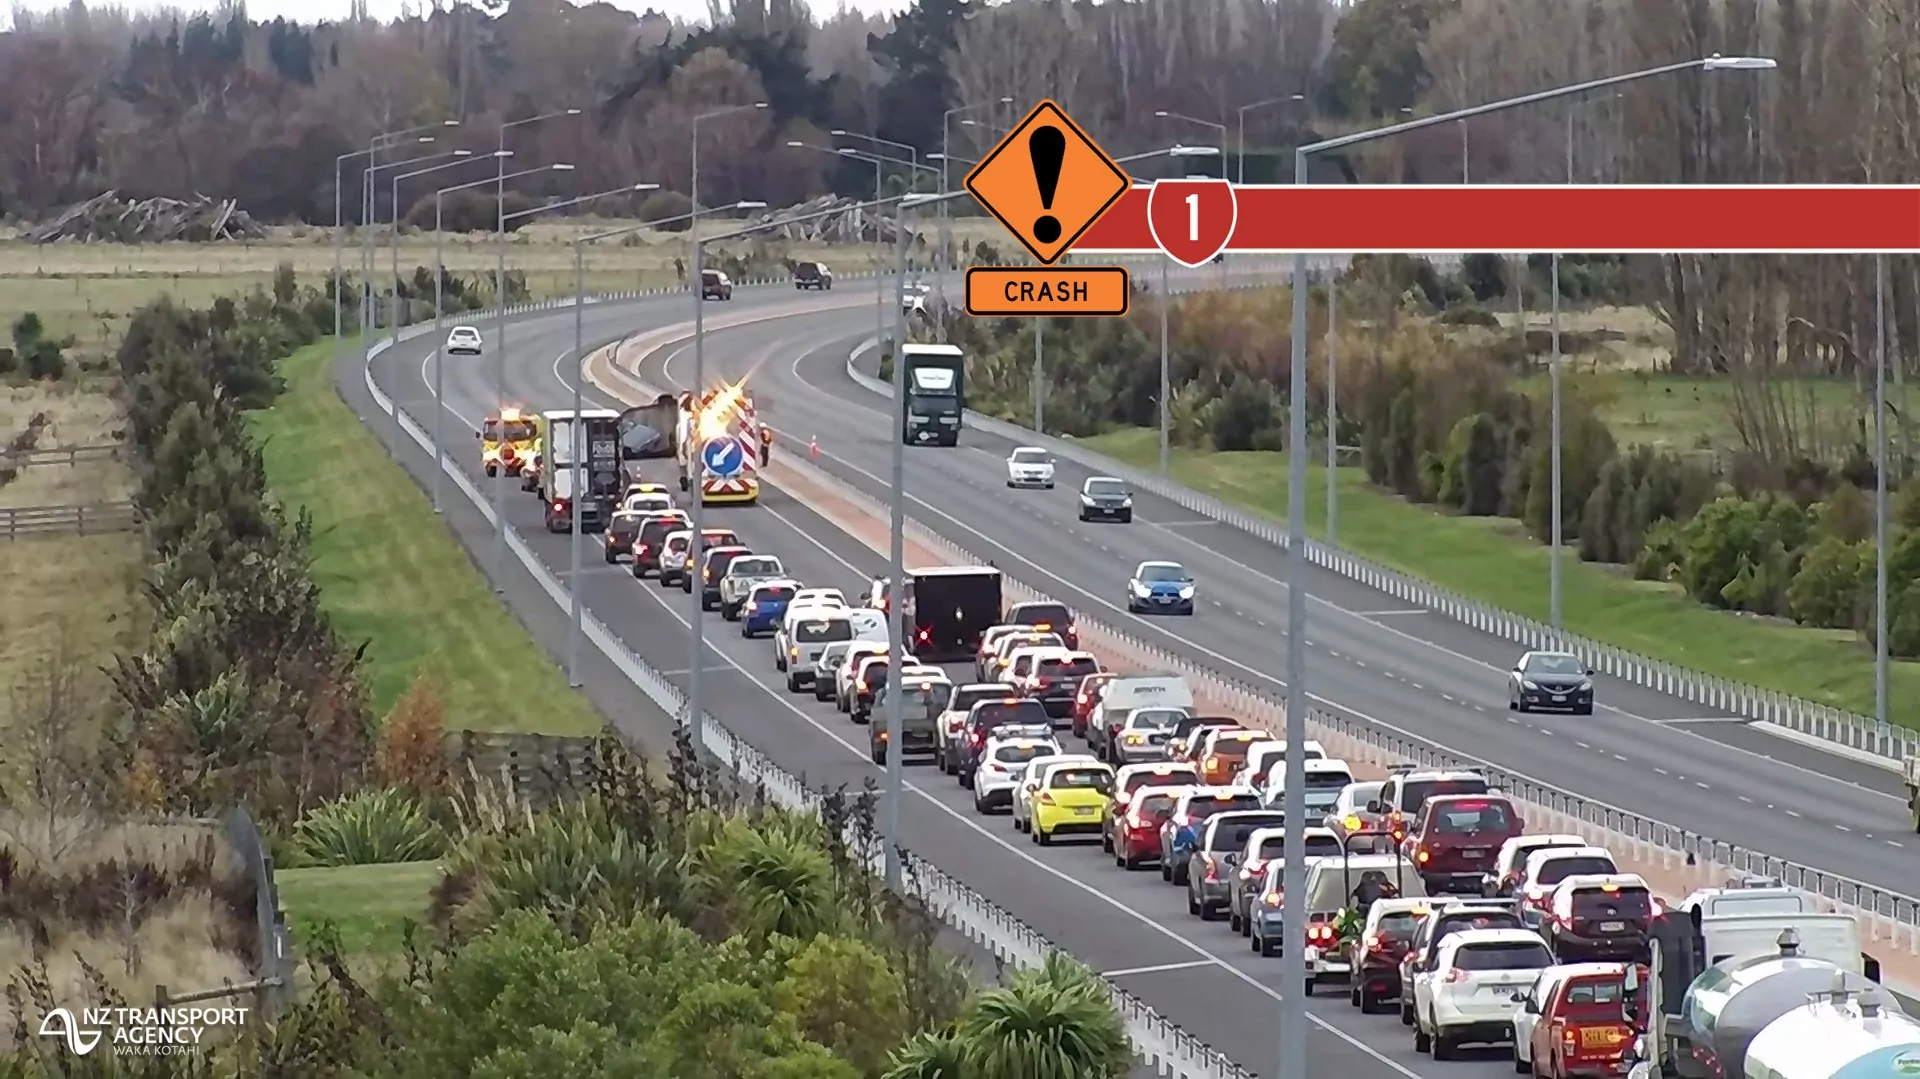 Christchurch motorists heading home can expect delays following a crash